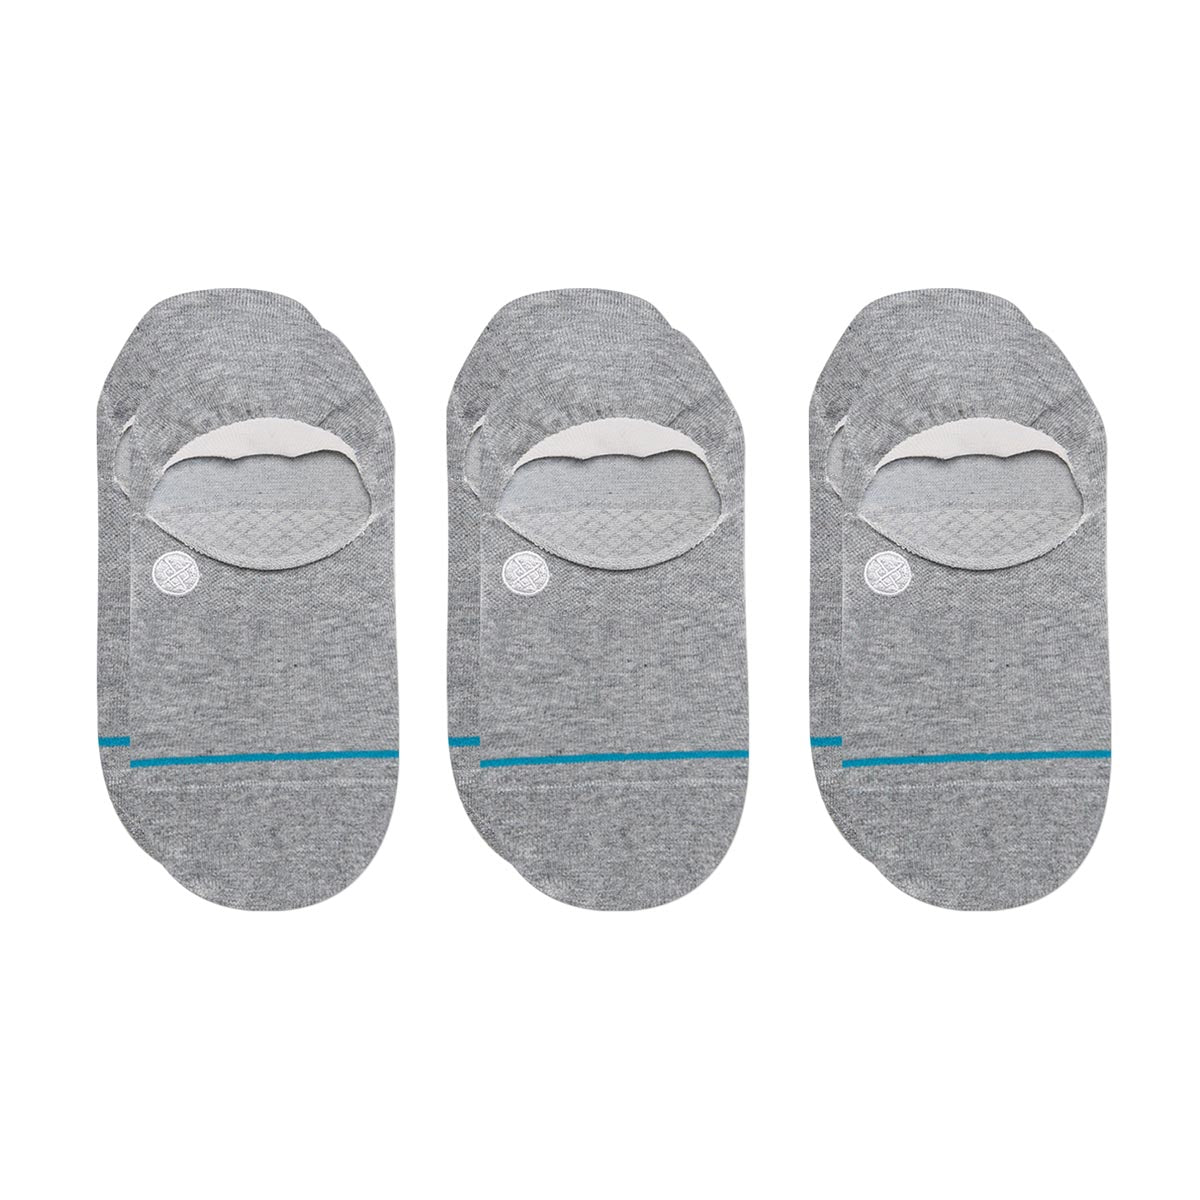 Stance Icon No Show 3 Pack Socks - Heather Grey image 1